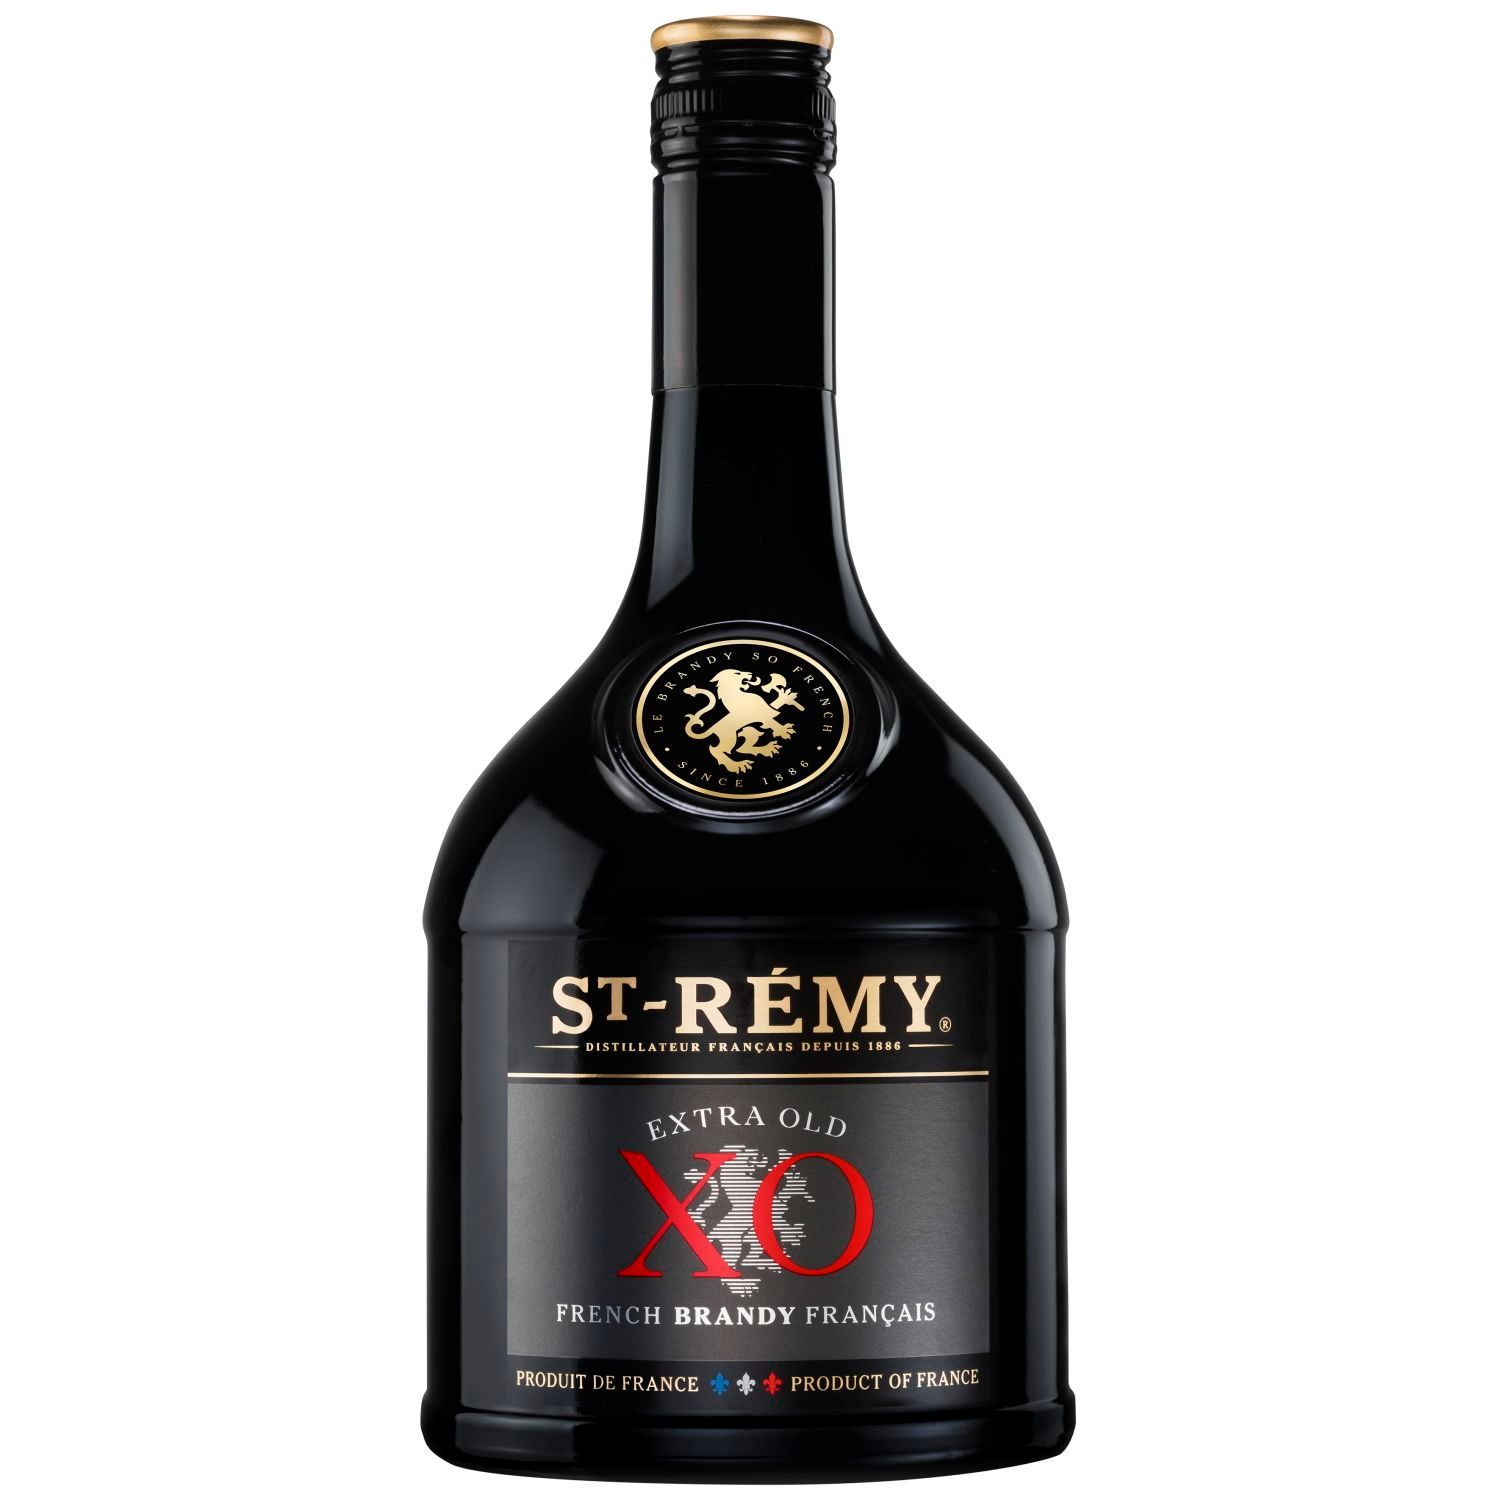 Multi-award-winning across the globe, St-Rémy XO is a rich and complex brandy. Its French aromatic intensity remains true to the style of the House.<br /> <br />Alcohol Volume: 40.00%<br /><br />Pack Format: Bottle<br /><br />Standard Drinks: 22</br /><br />Pack Type: Bottle<br /><br />Country of Origin: France<br />